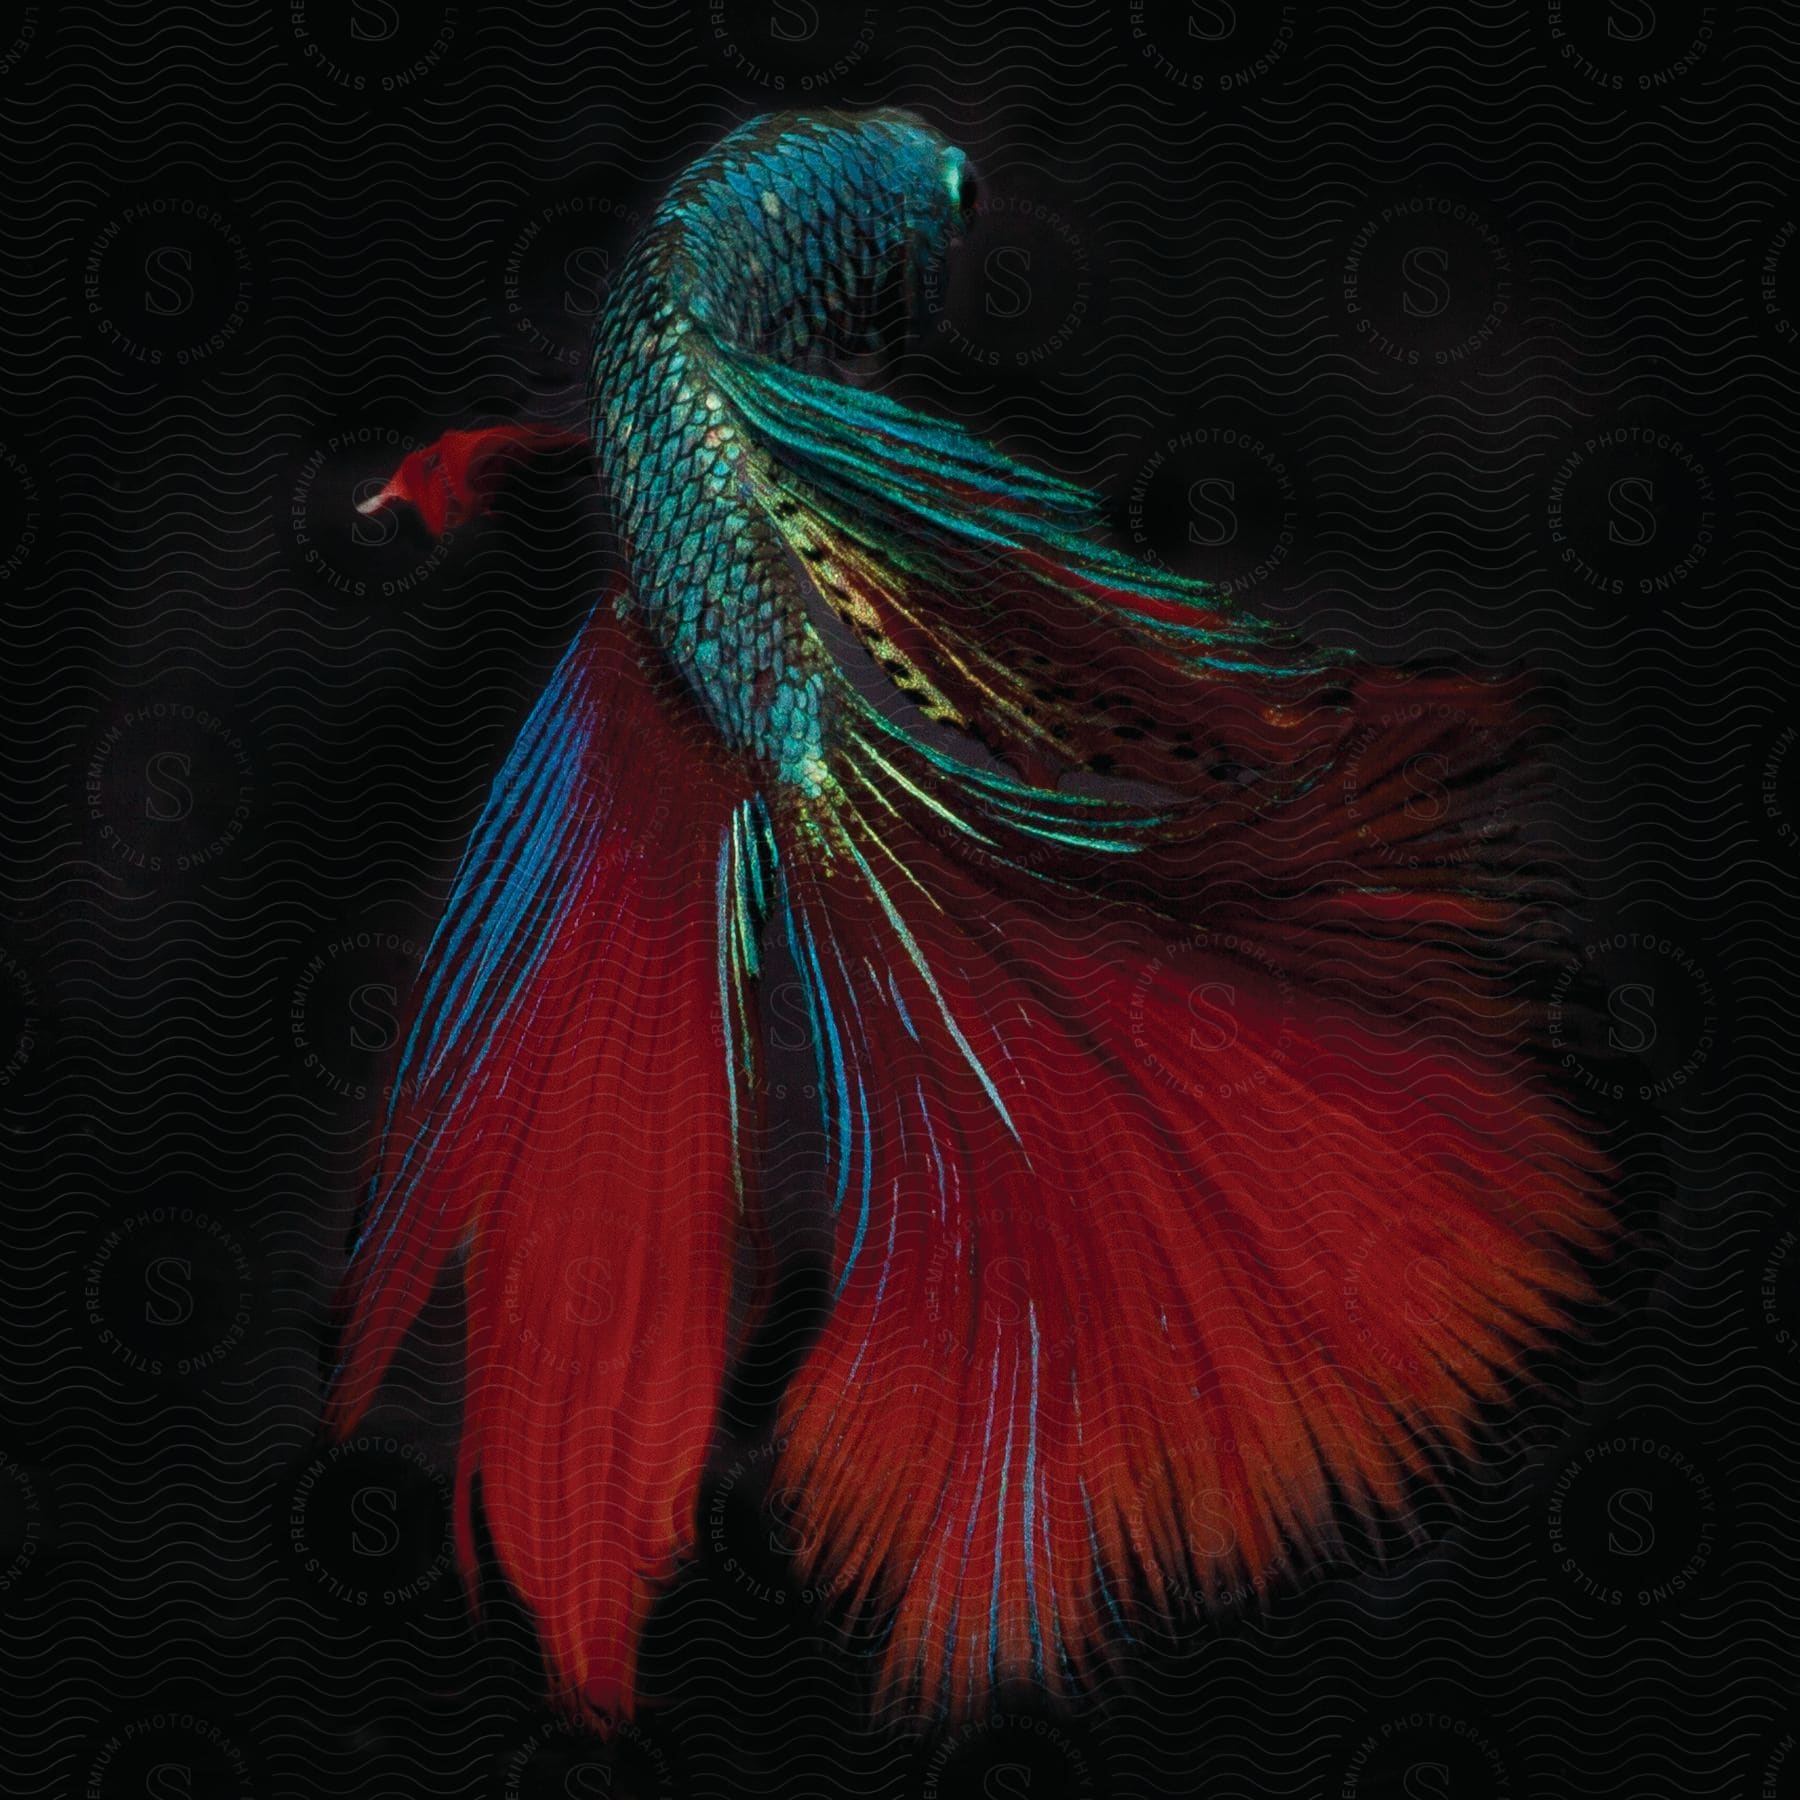 A realistic digital art of a fish with red fins